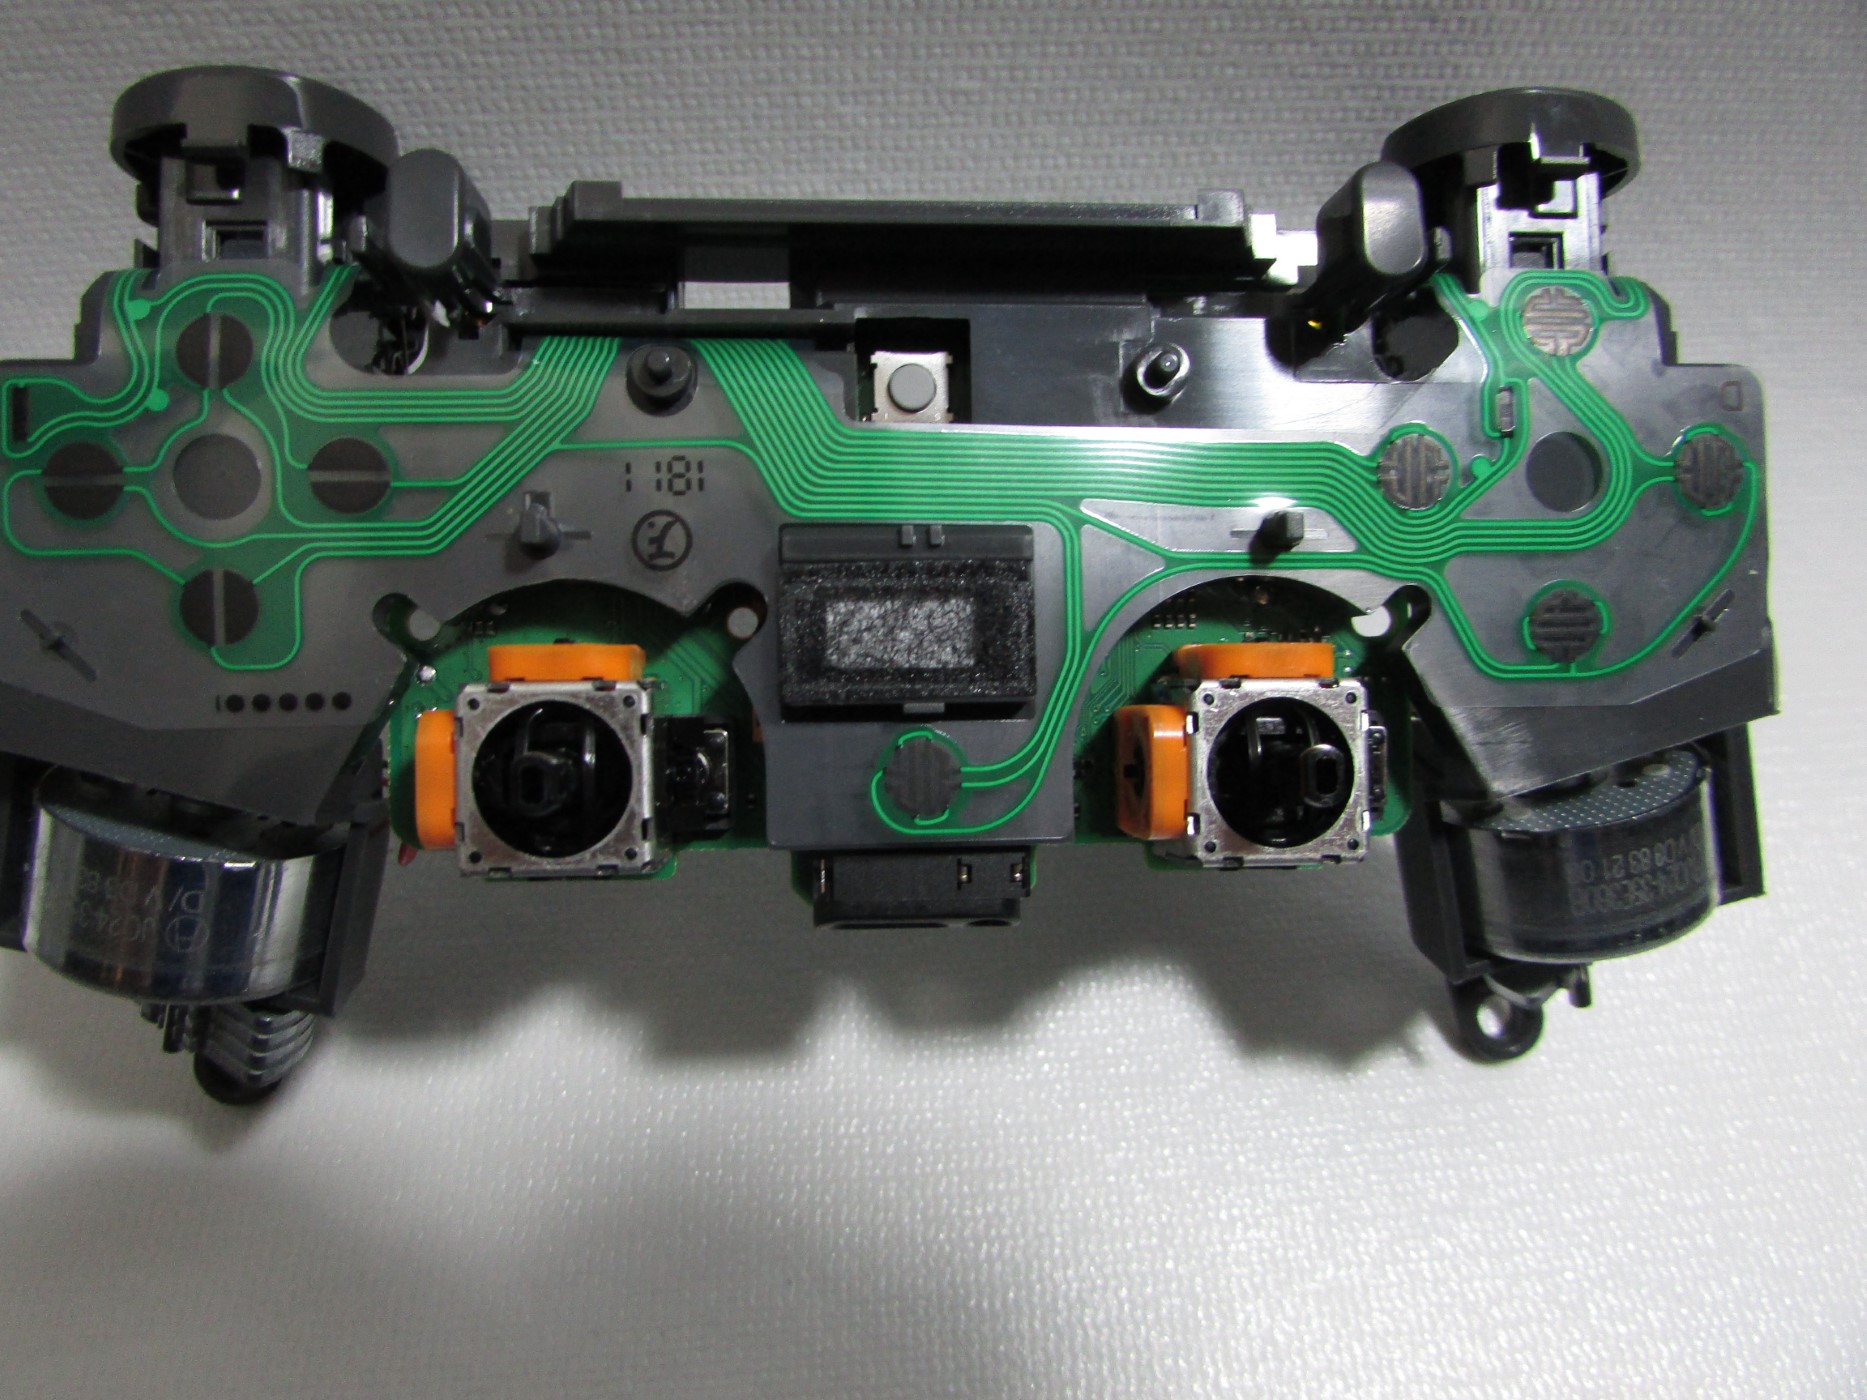 ps4 controller inside